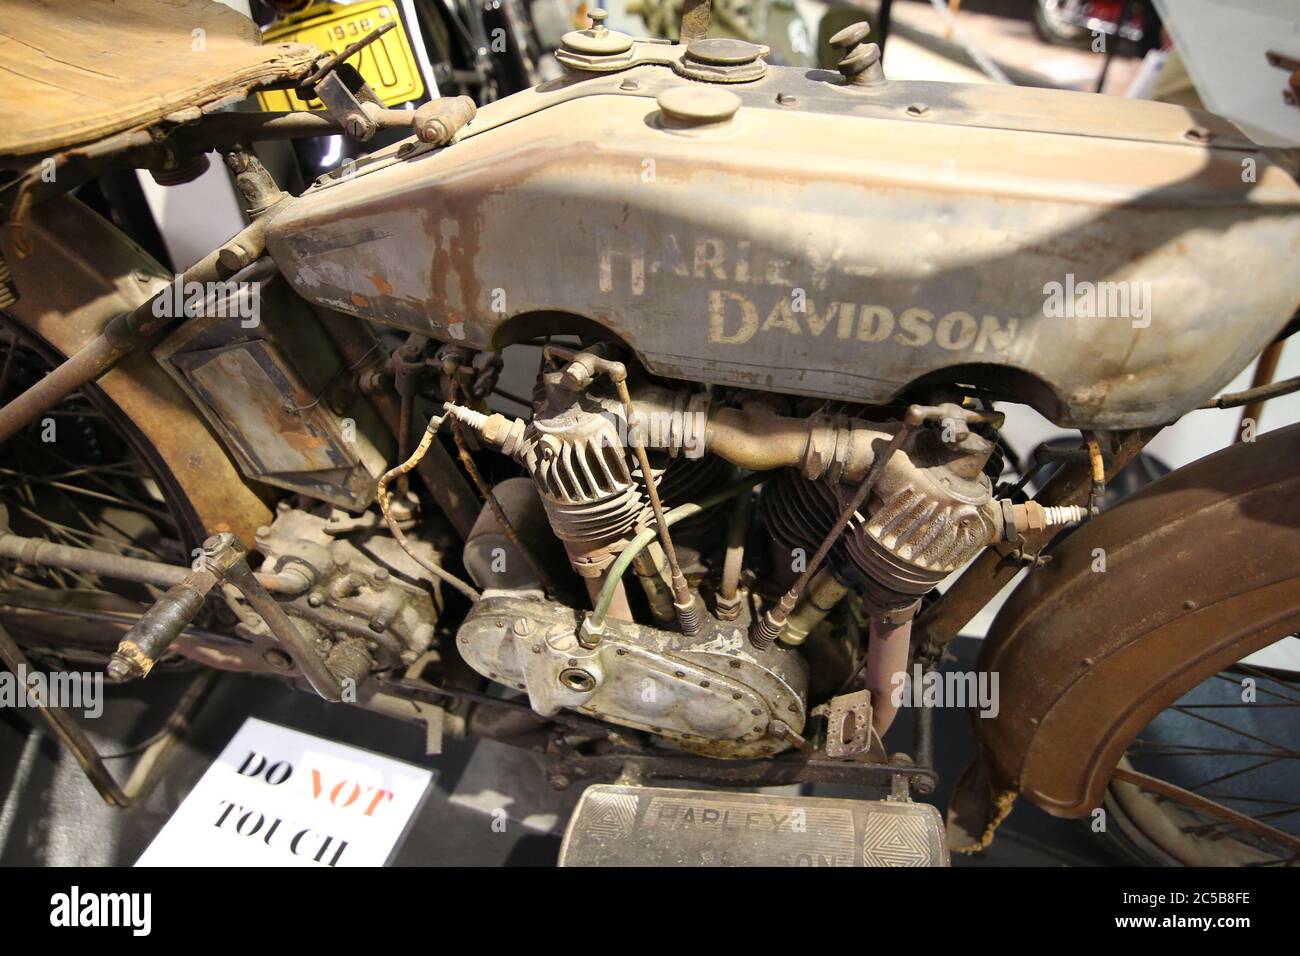 1916 Harley Davidson at the San Diego Automotive Museum Stock Photo